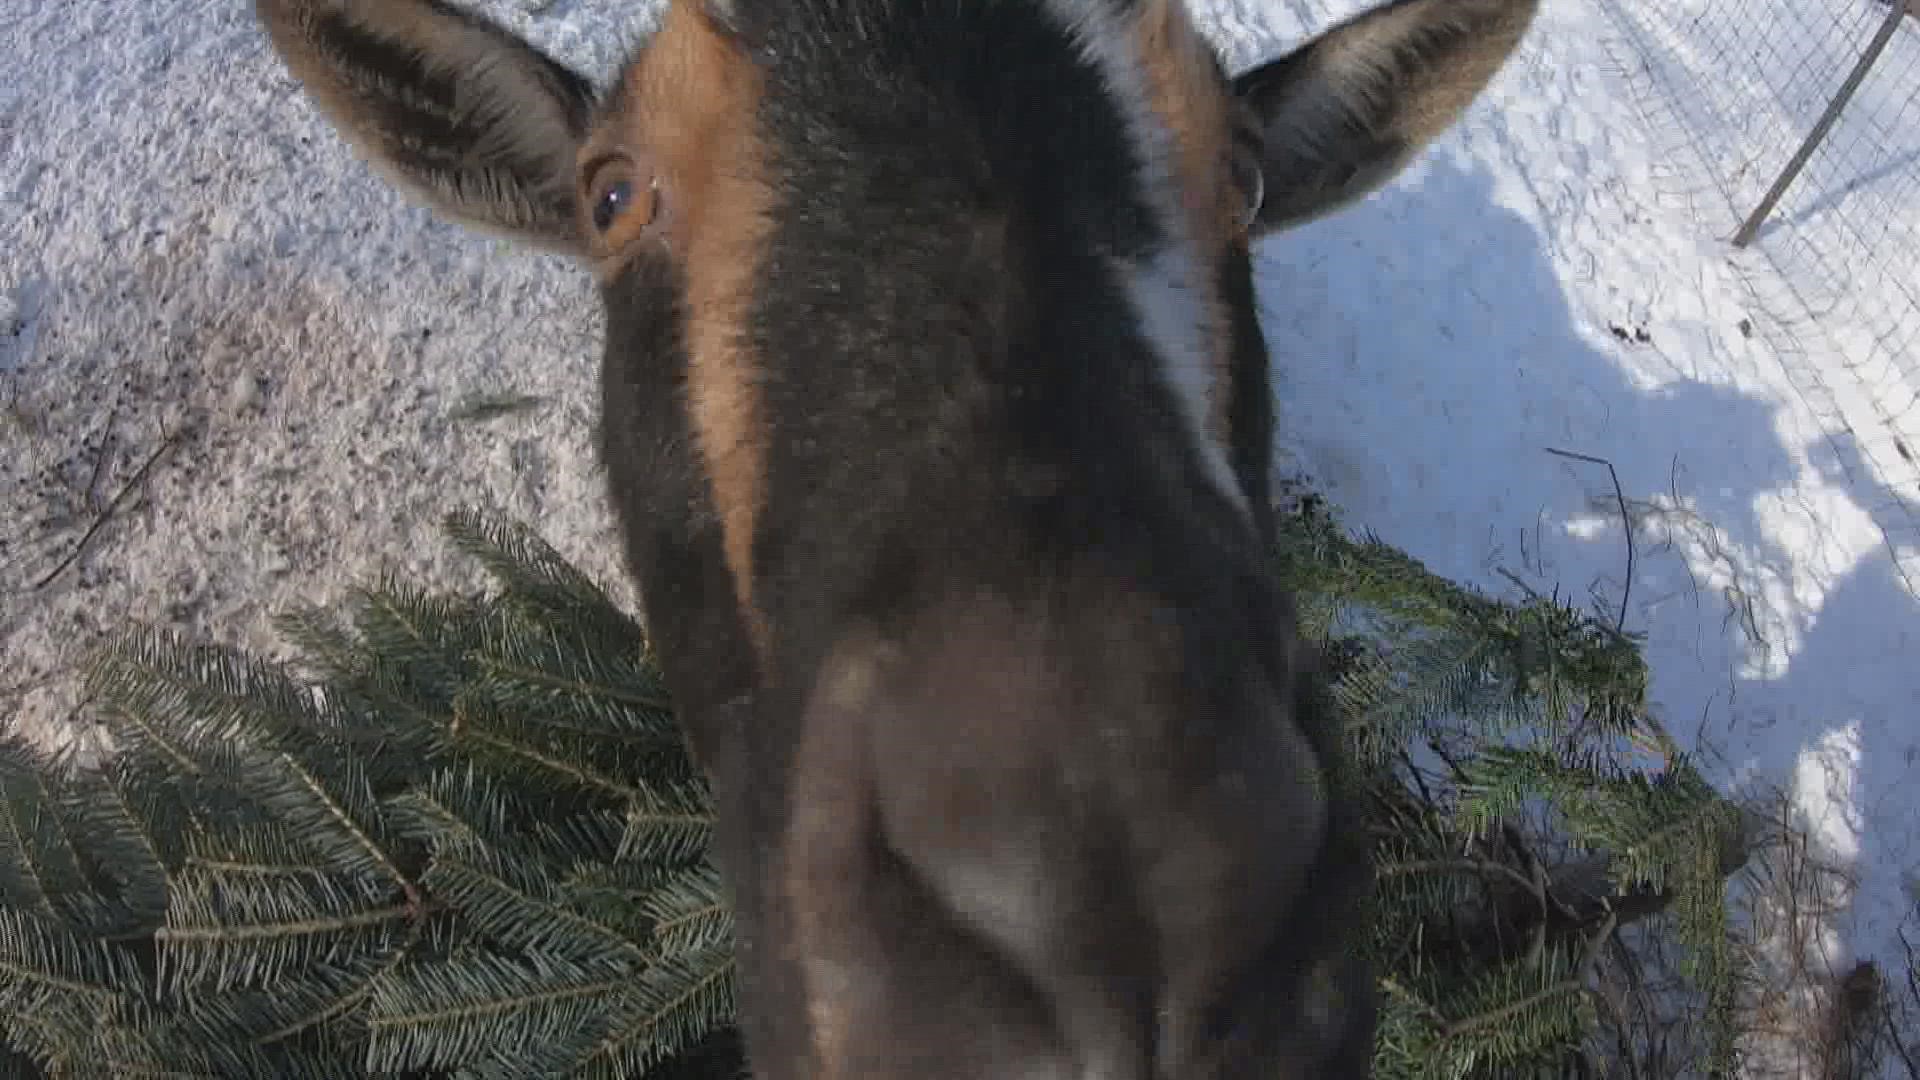 Iron Leaf Farm in Litchfield is collecting Christmas trees to feed to its goats. Evergreens have a number of health benefits, like nutrients and antioxidants.